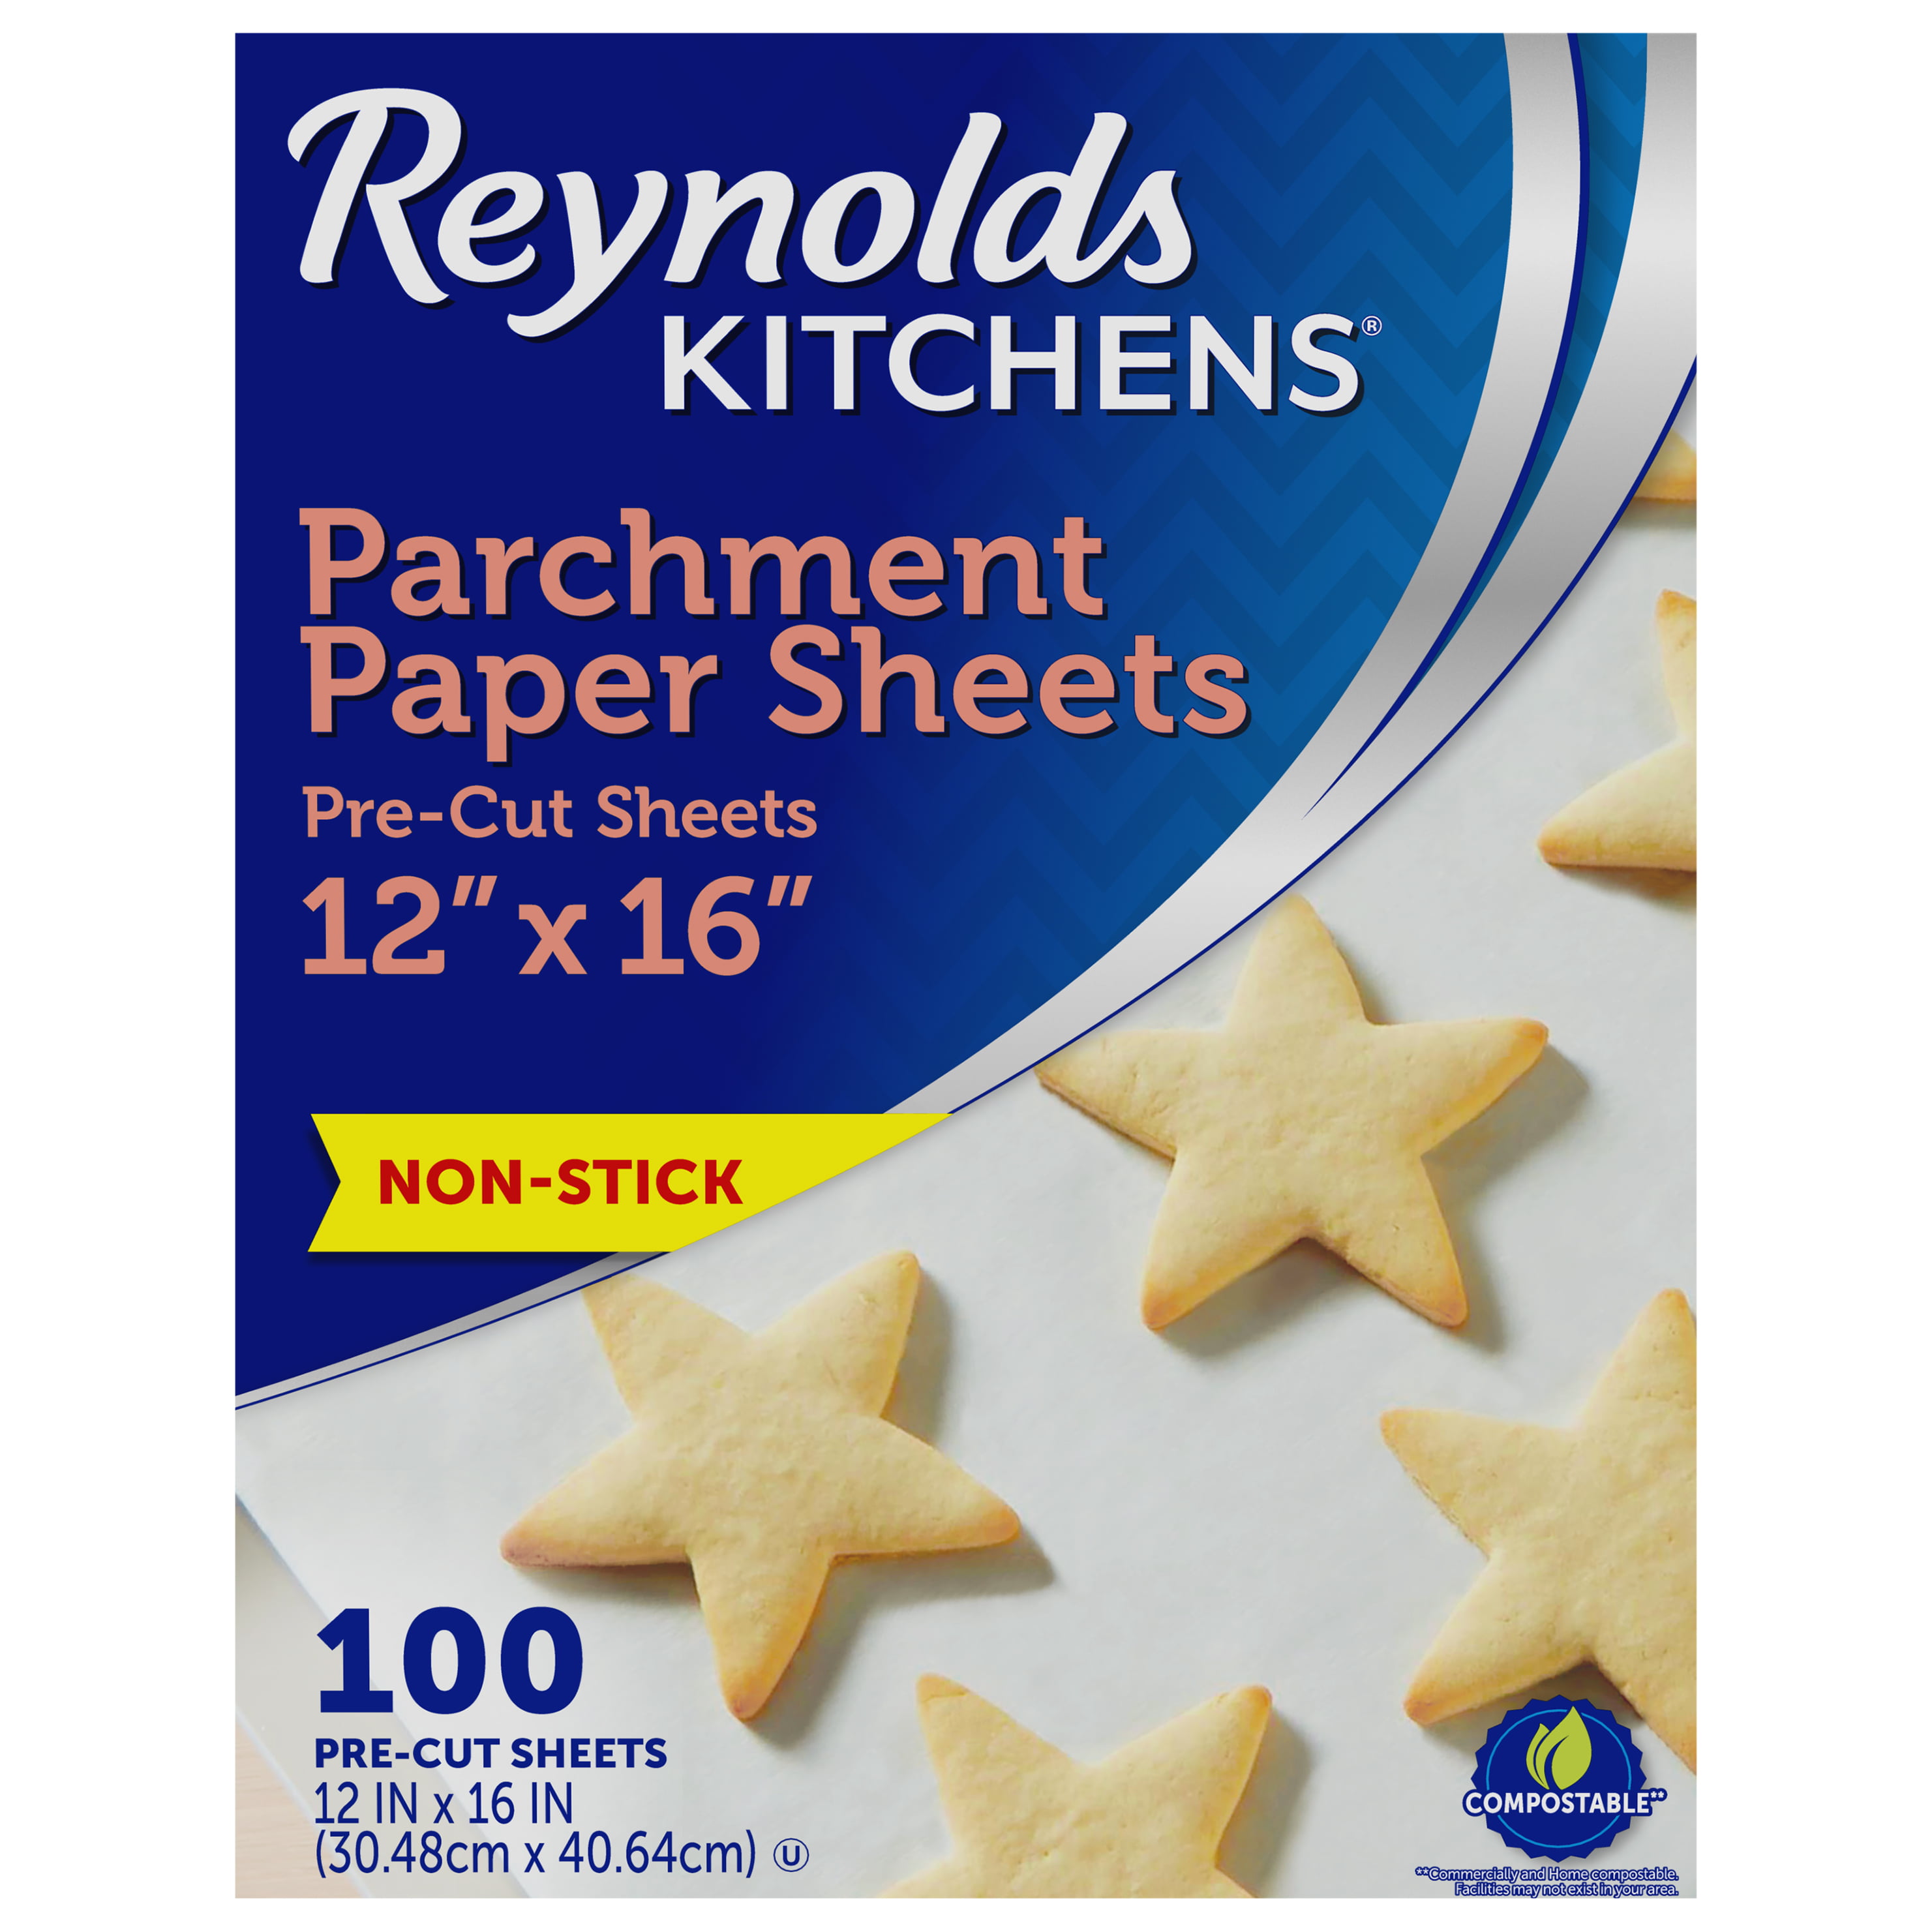 Reynolds Kitchens Stay Flat Parchment Paper with SmartGrid, 50 Square Feet